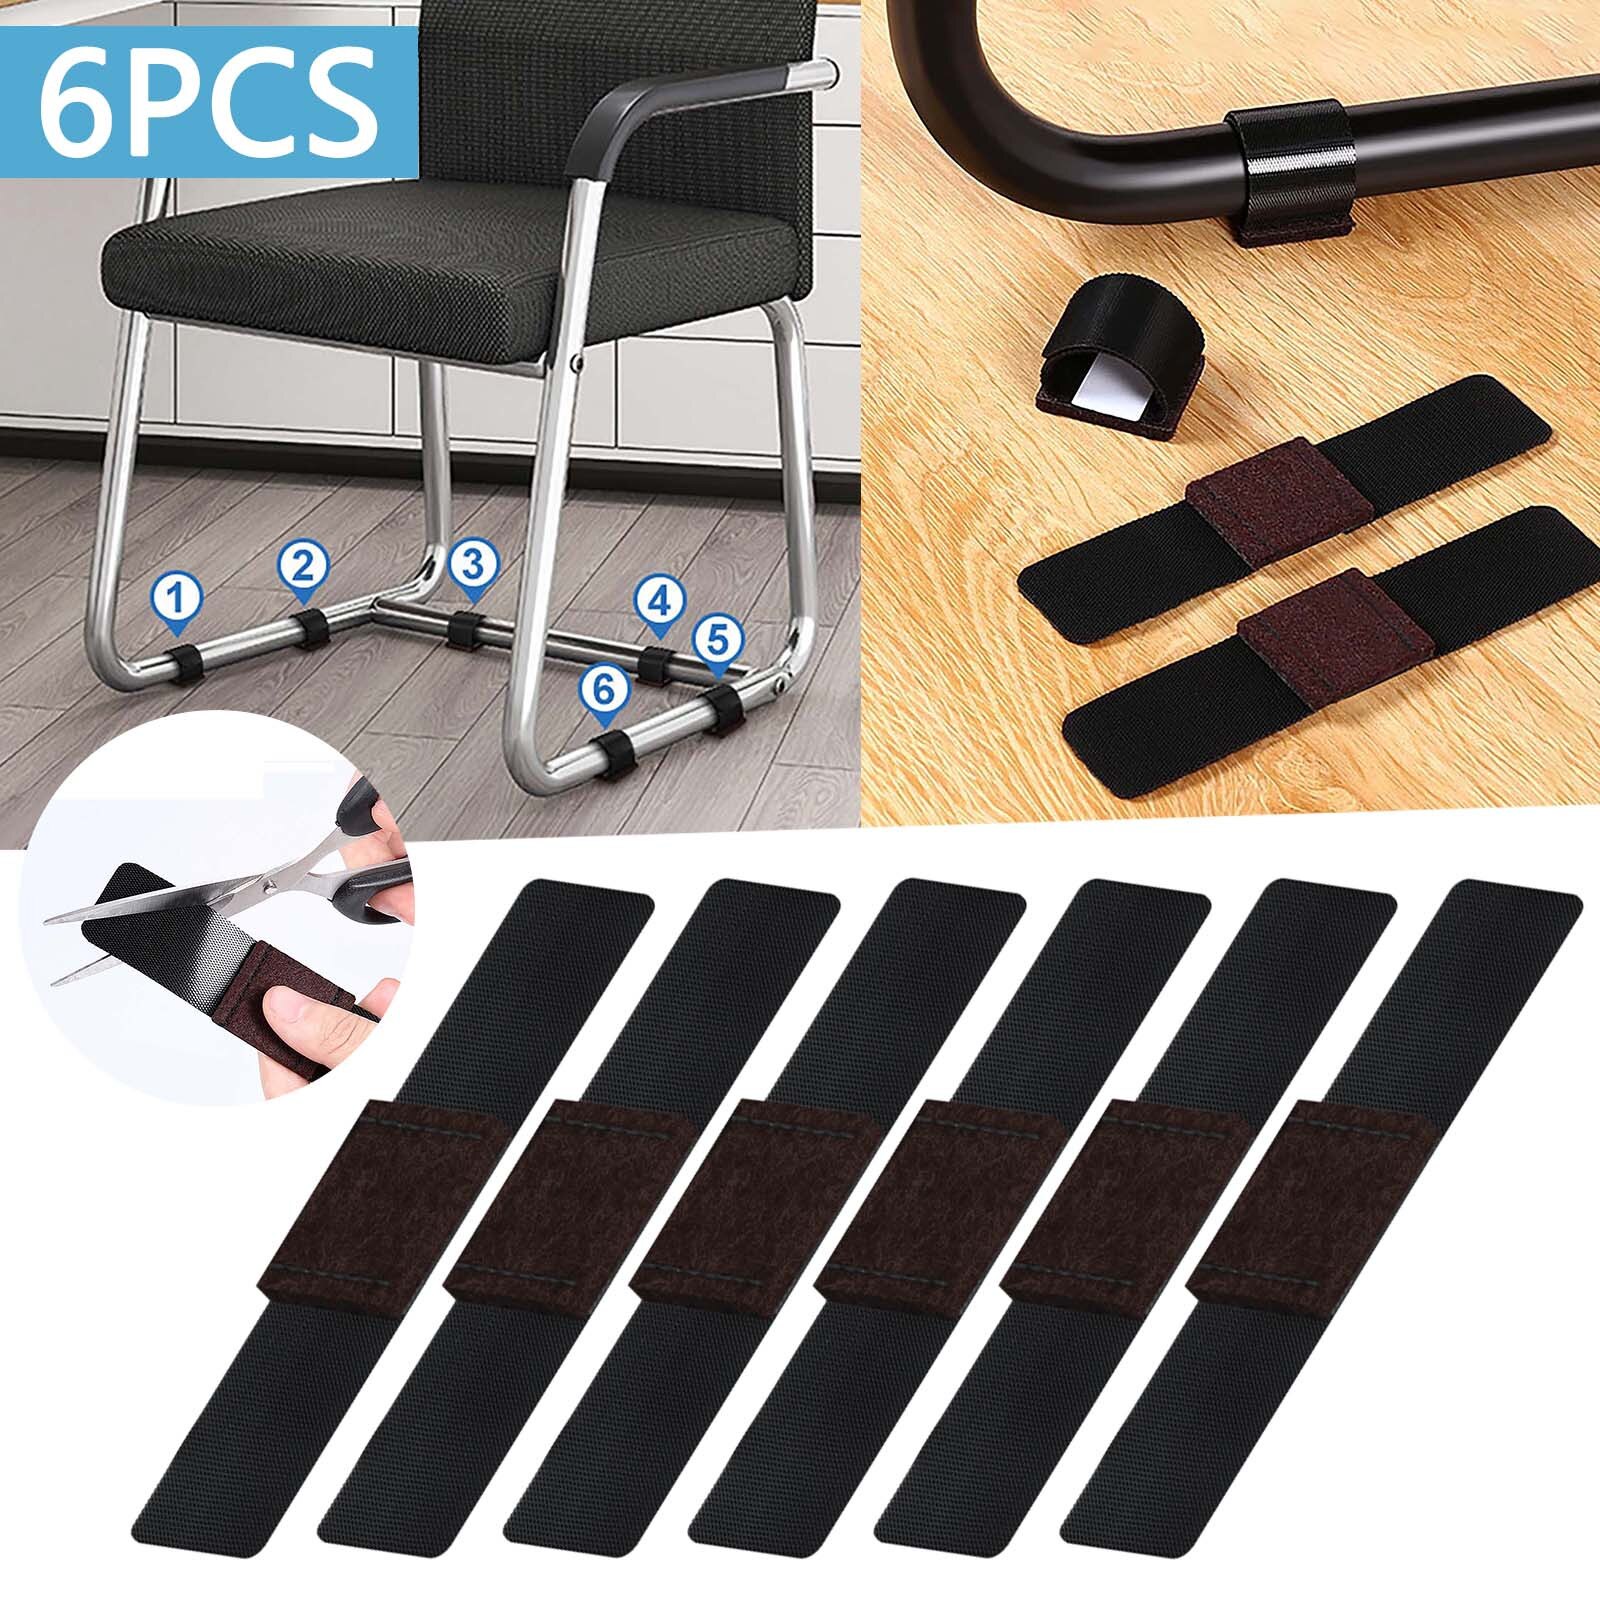 6PCS/Set Chair Foot Pad With Hook And Loop Fasteners Wraparound Floor Protector For Chair Sled Base Protects Hardwood Floor